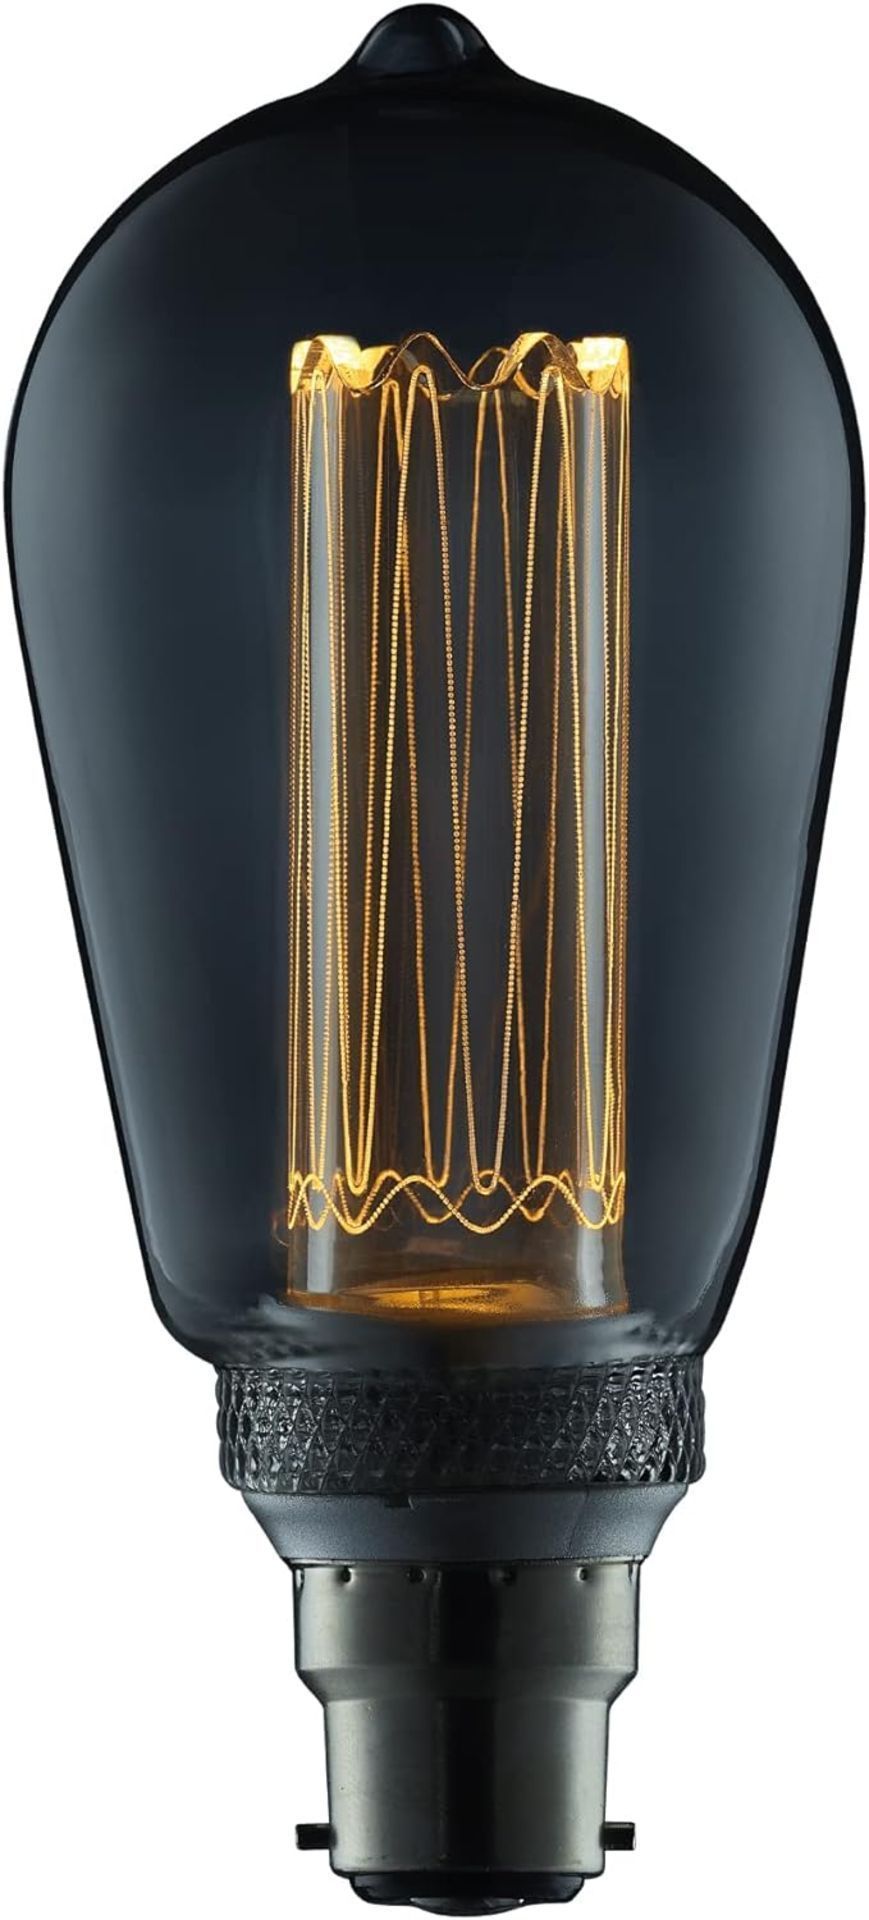 50 x Brand New TCP Decorative LED 100L ST64 4W B22/BC Non Dimmable 2000 Kelvin,Smoked Glass rrp £ - Image 2 of 3